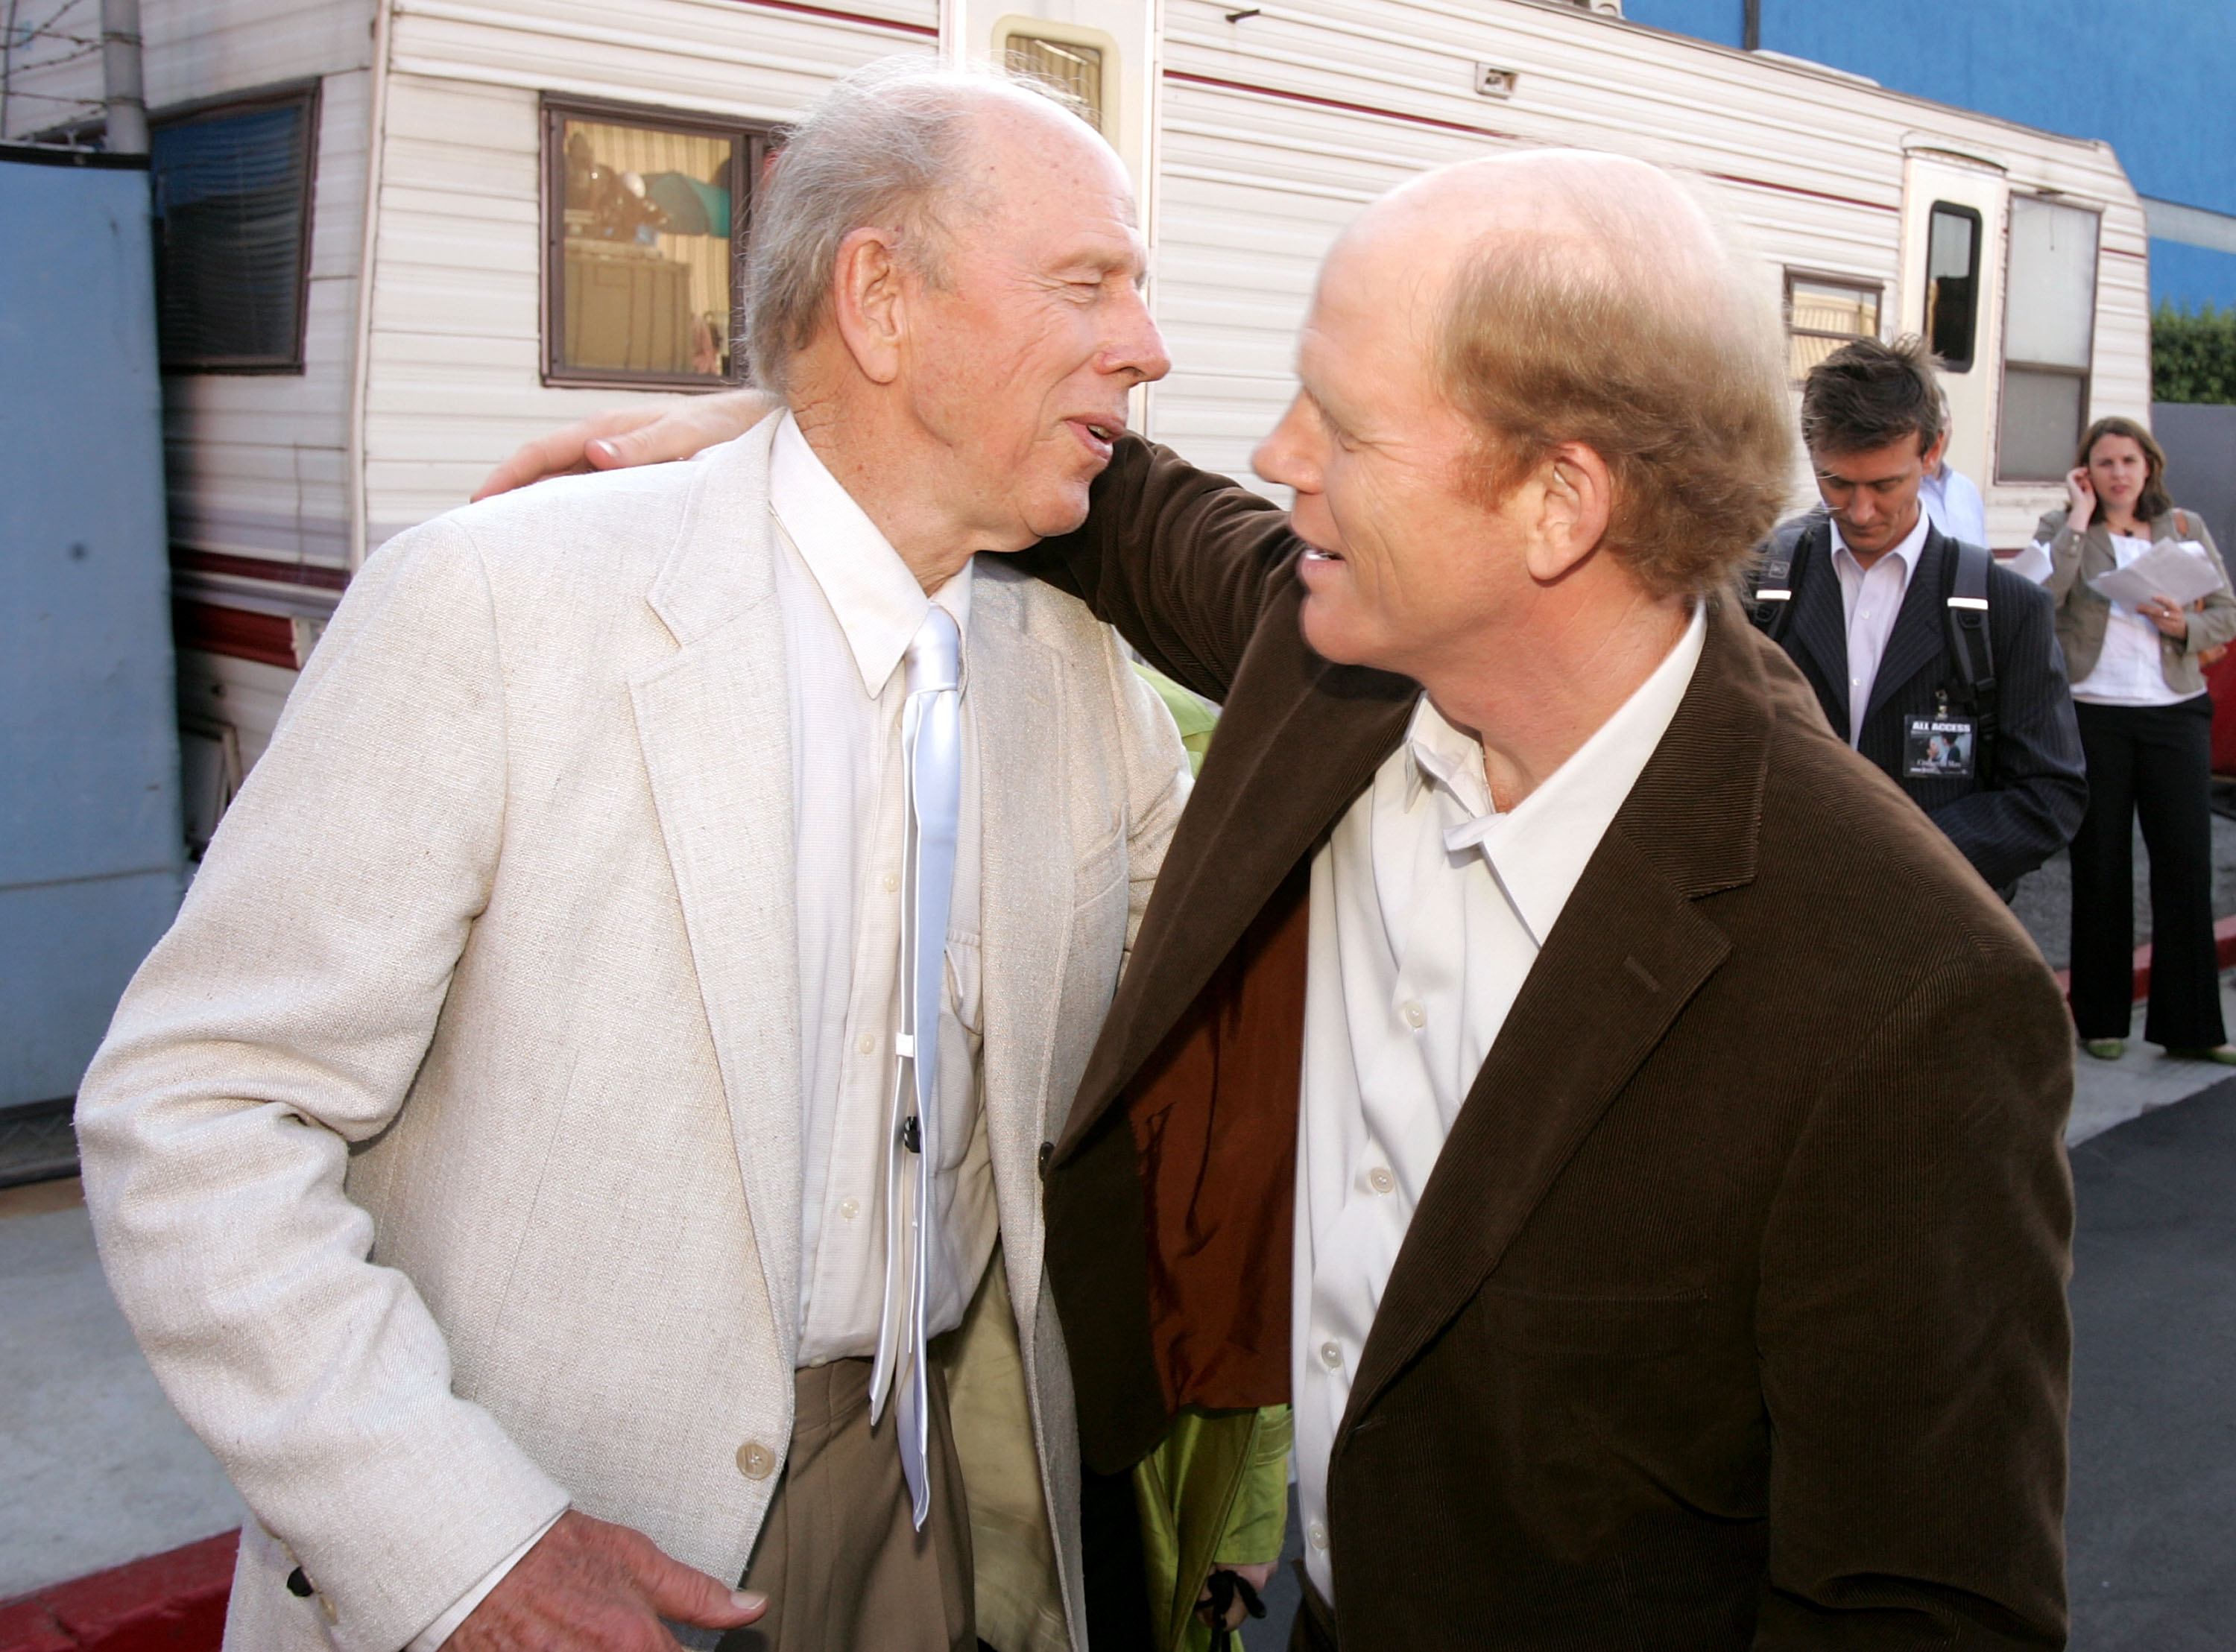 Actor Rance Howard and his son director Ron Howard embrace at the premiere of 'Cinderella Man' in California, 2005